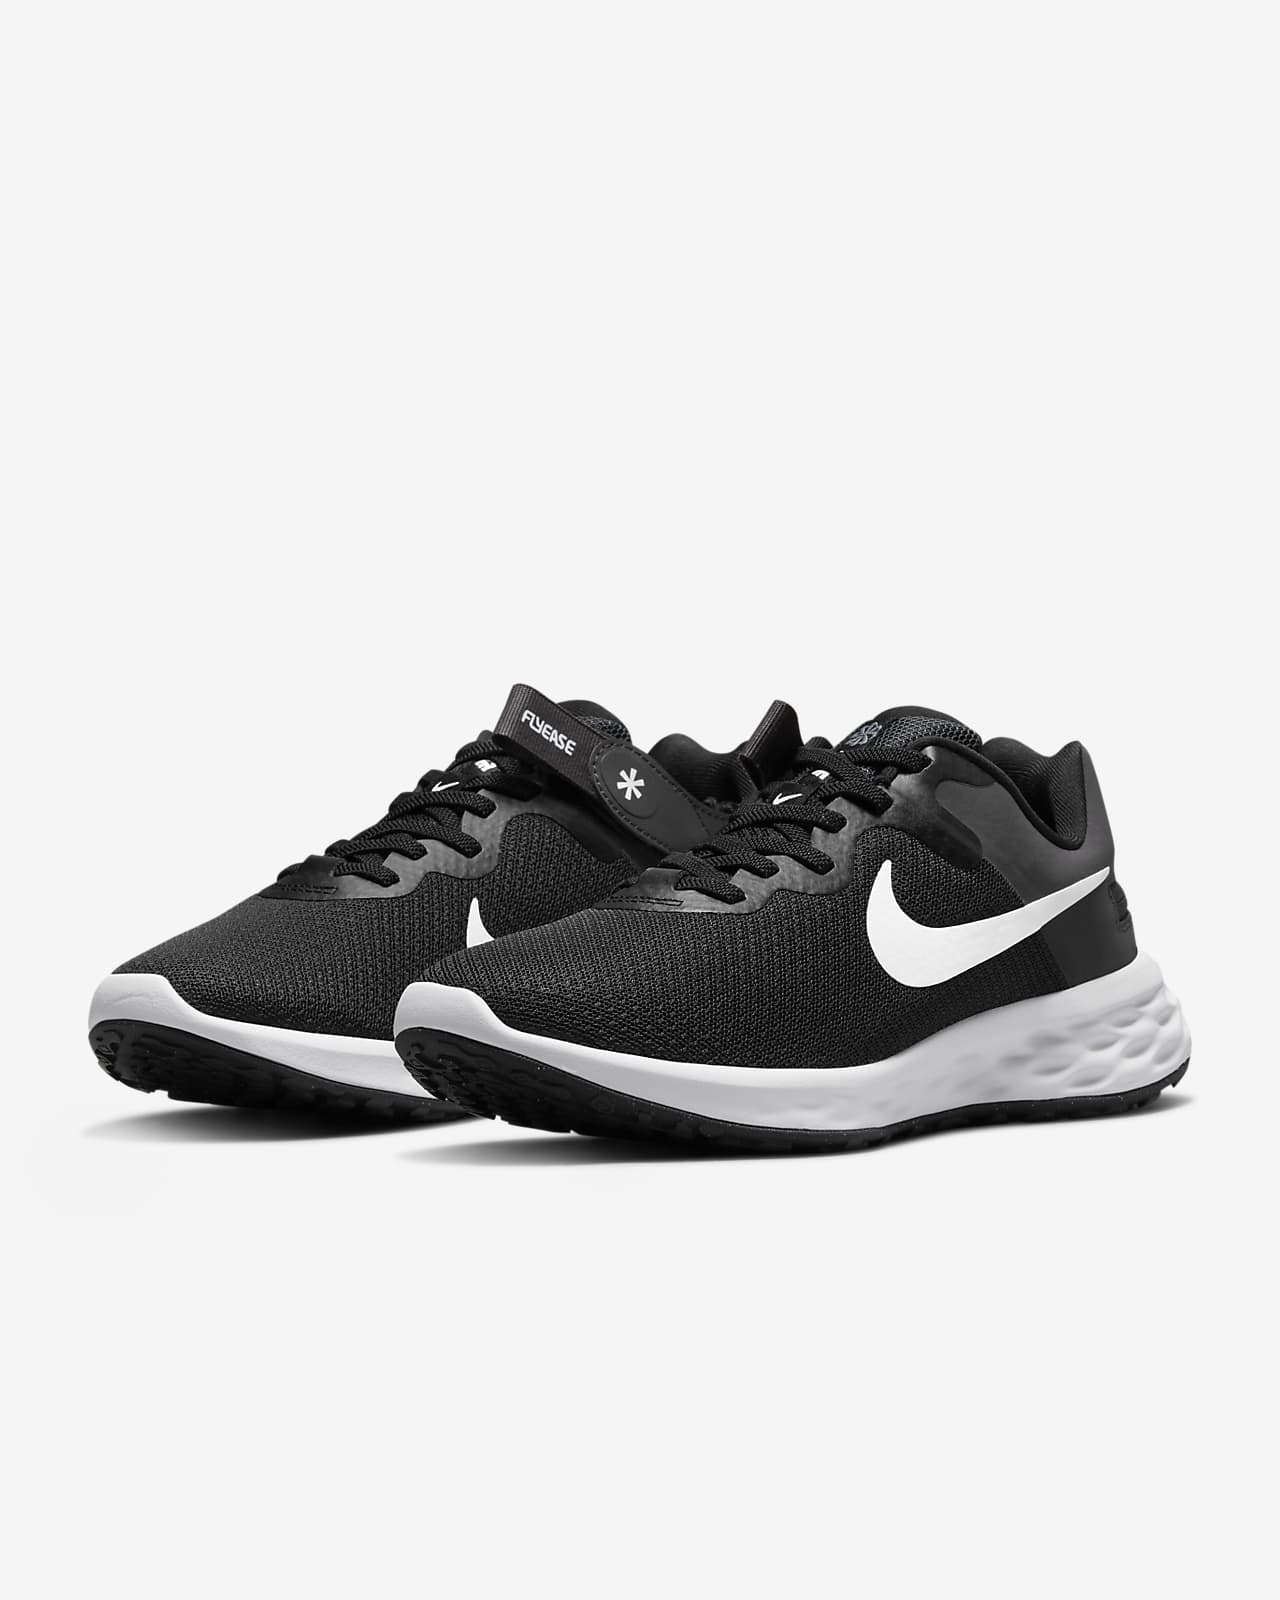 Revolution 6 FlyEase Women's Easy Road Running Shoes. Nike ID